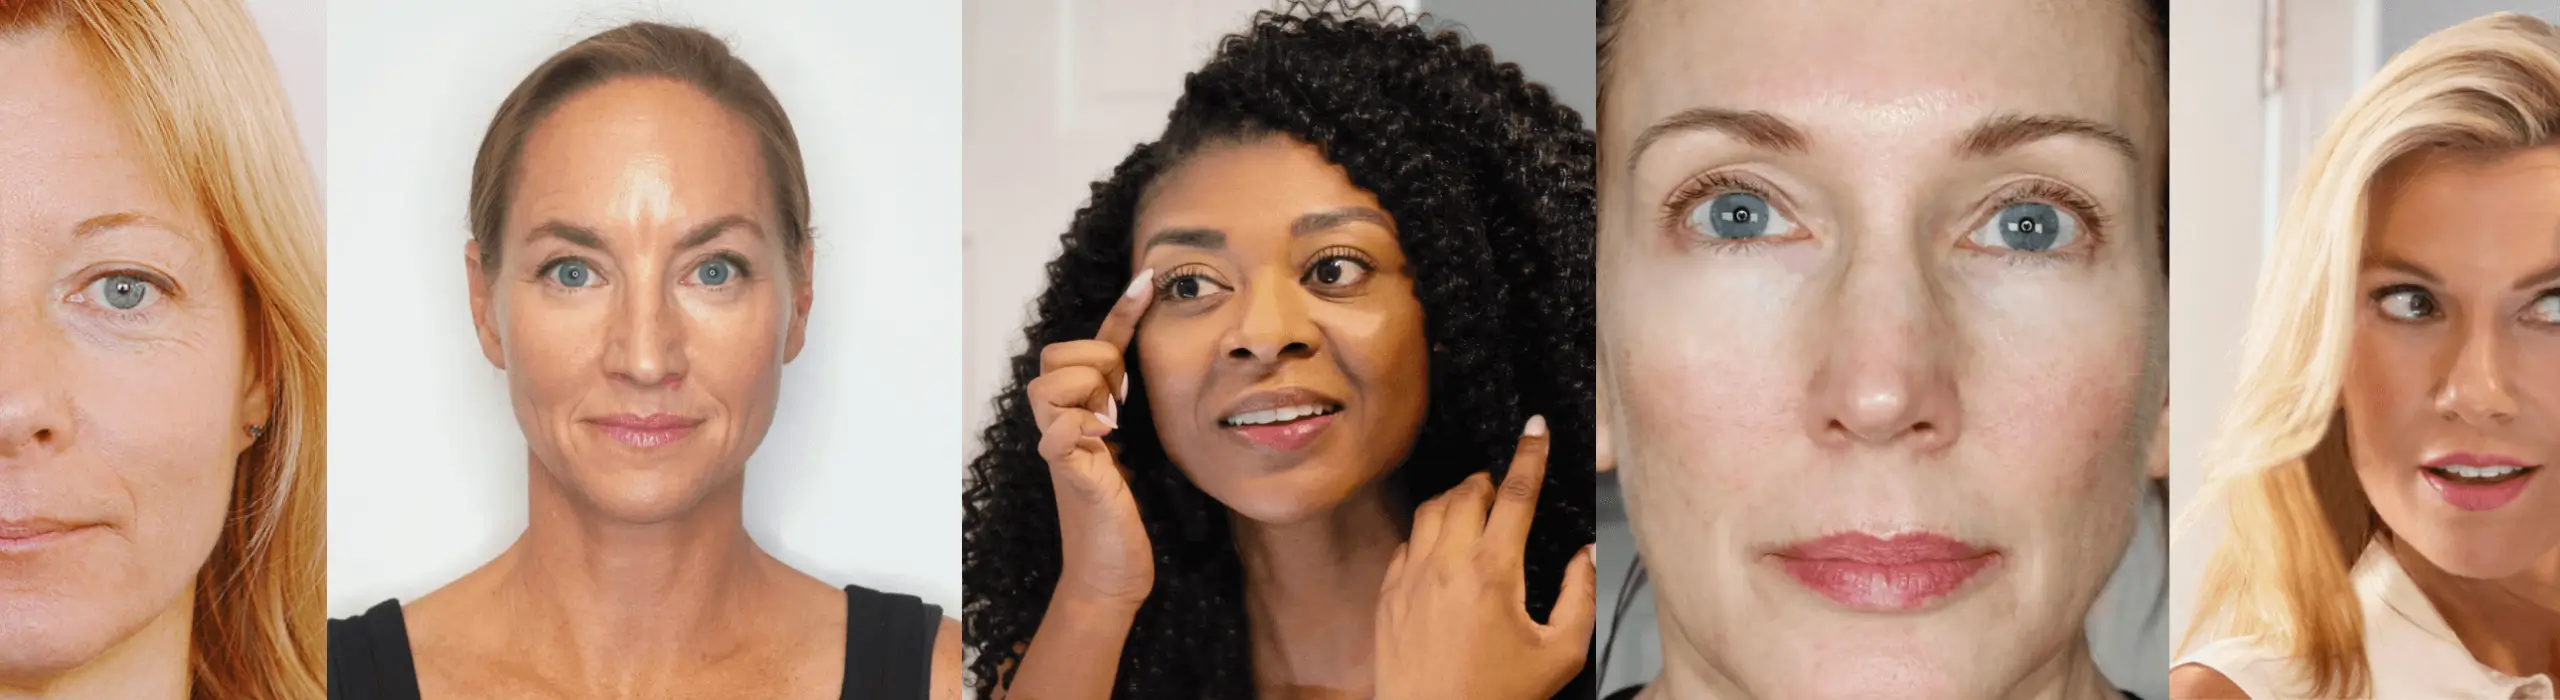 five beautiful women with glowing skin from using microcurrent devices.